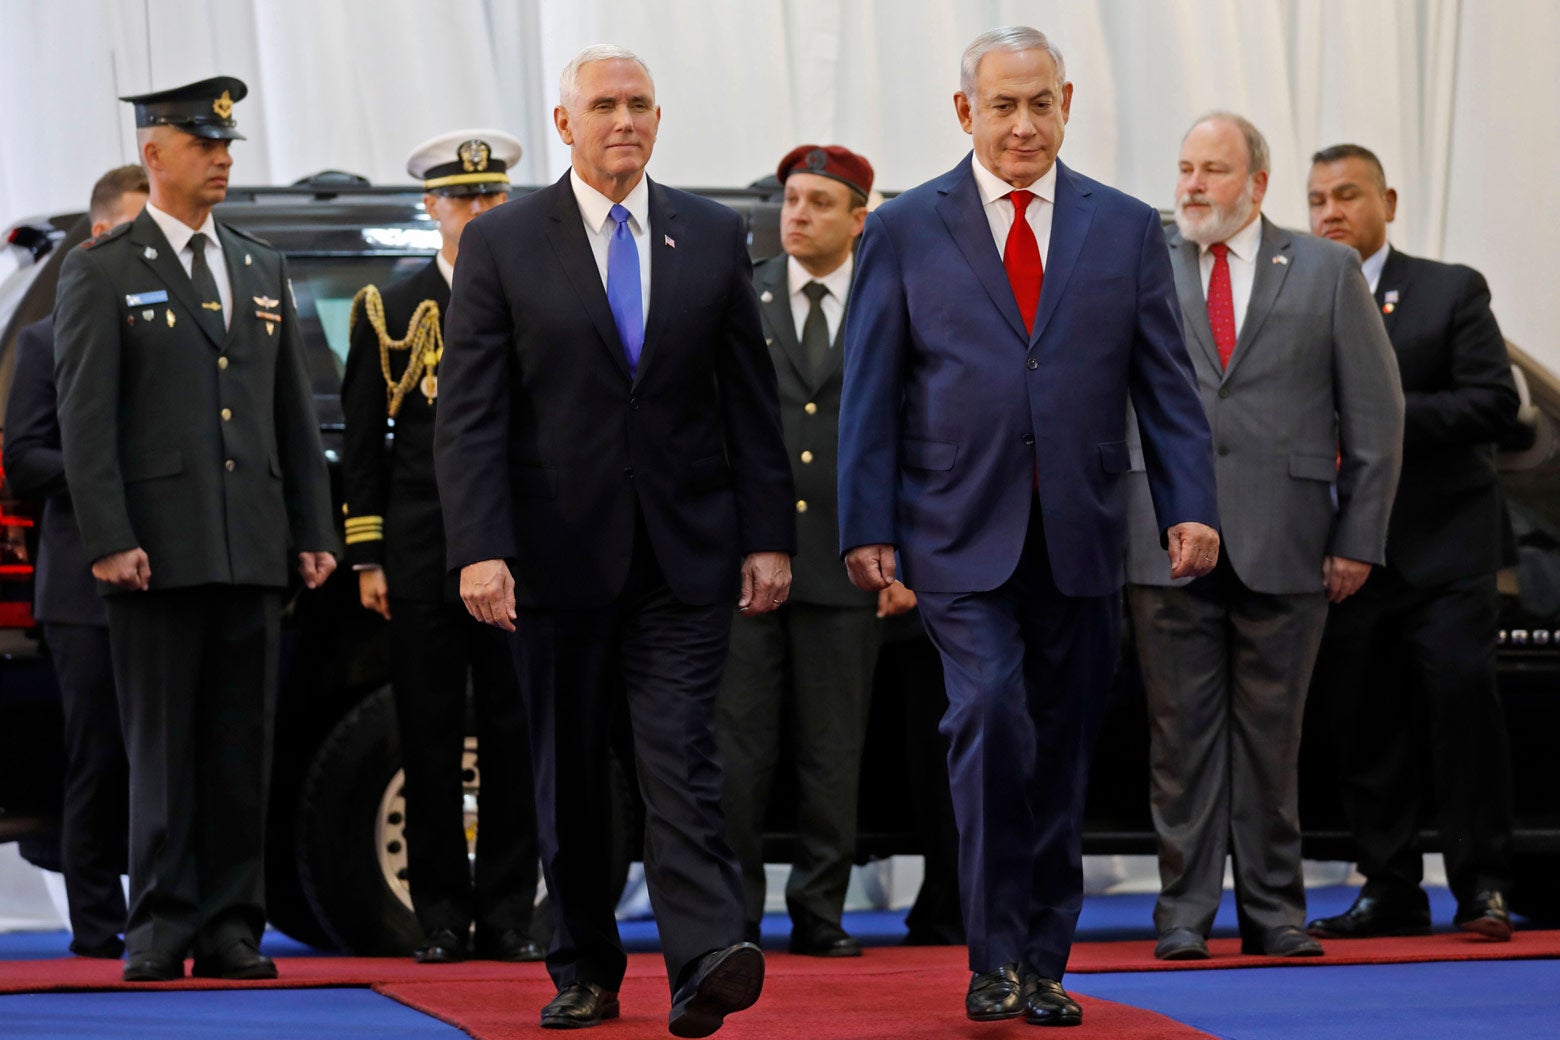 U.S. Vice President Mike Pence (C-L) is welcomed by Israeli Prime Minister Benjamin Netanyahu (C-R) at a ceremony at the Prime Minister's Office in Jerusalem on January 22, 2018.